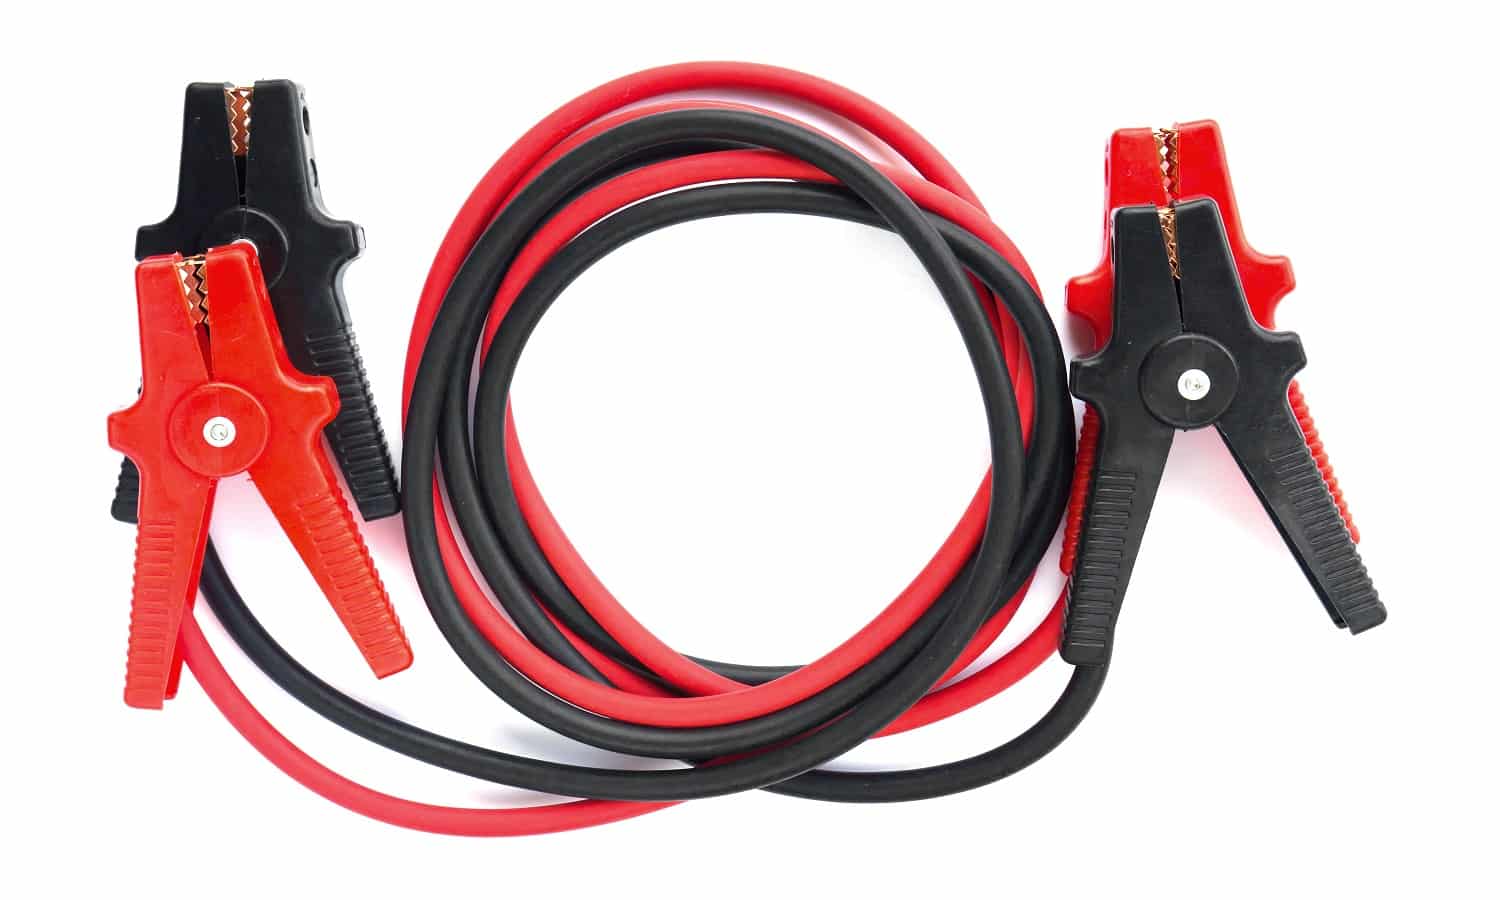 Car battery jumper cables over white background